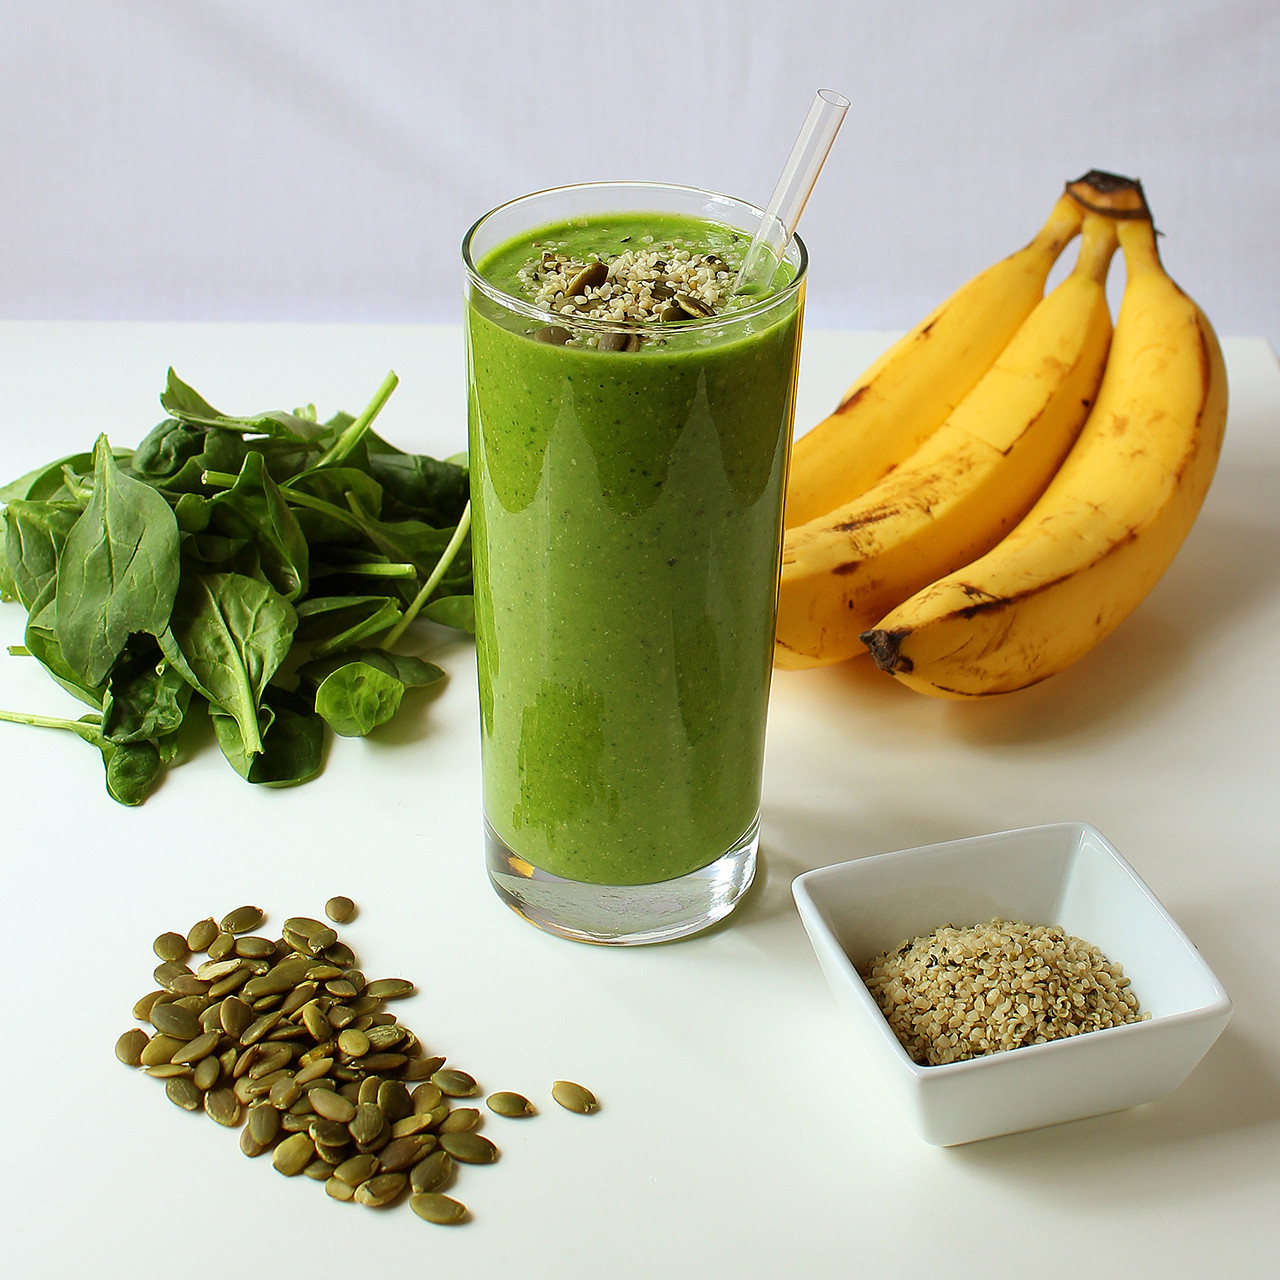 Healthy Smoothies With Protein Powder
 Green Protein Power Breakfast Smoothie I LOVE VEGAN